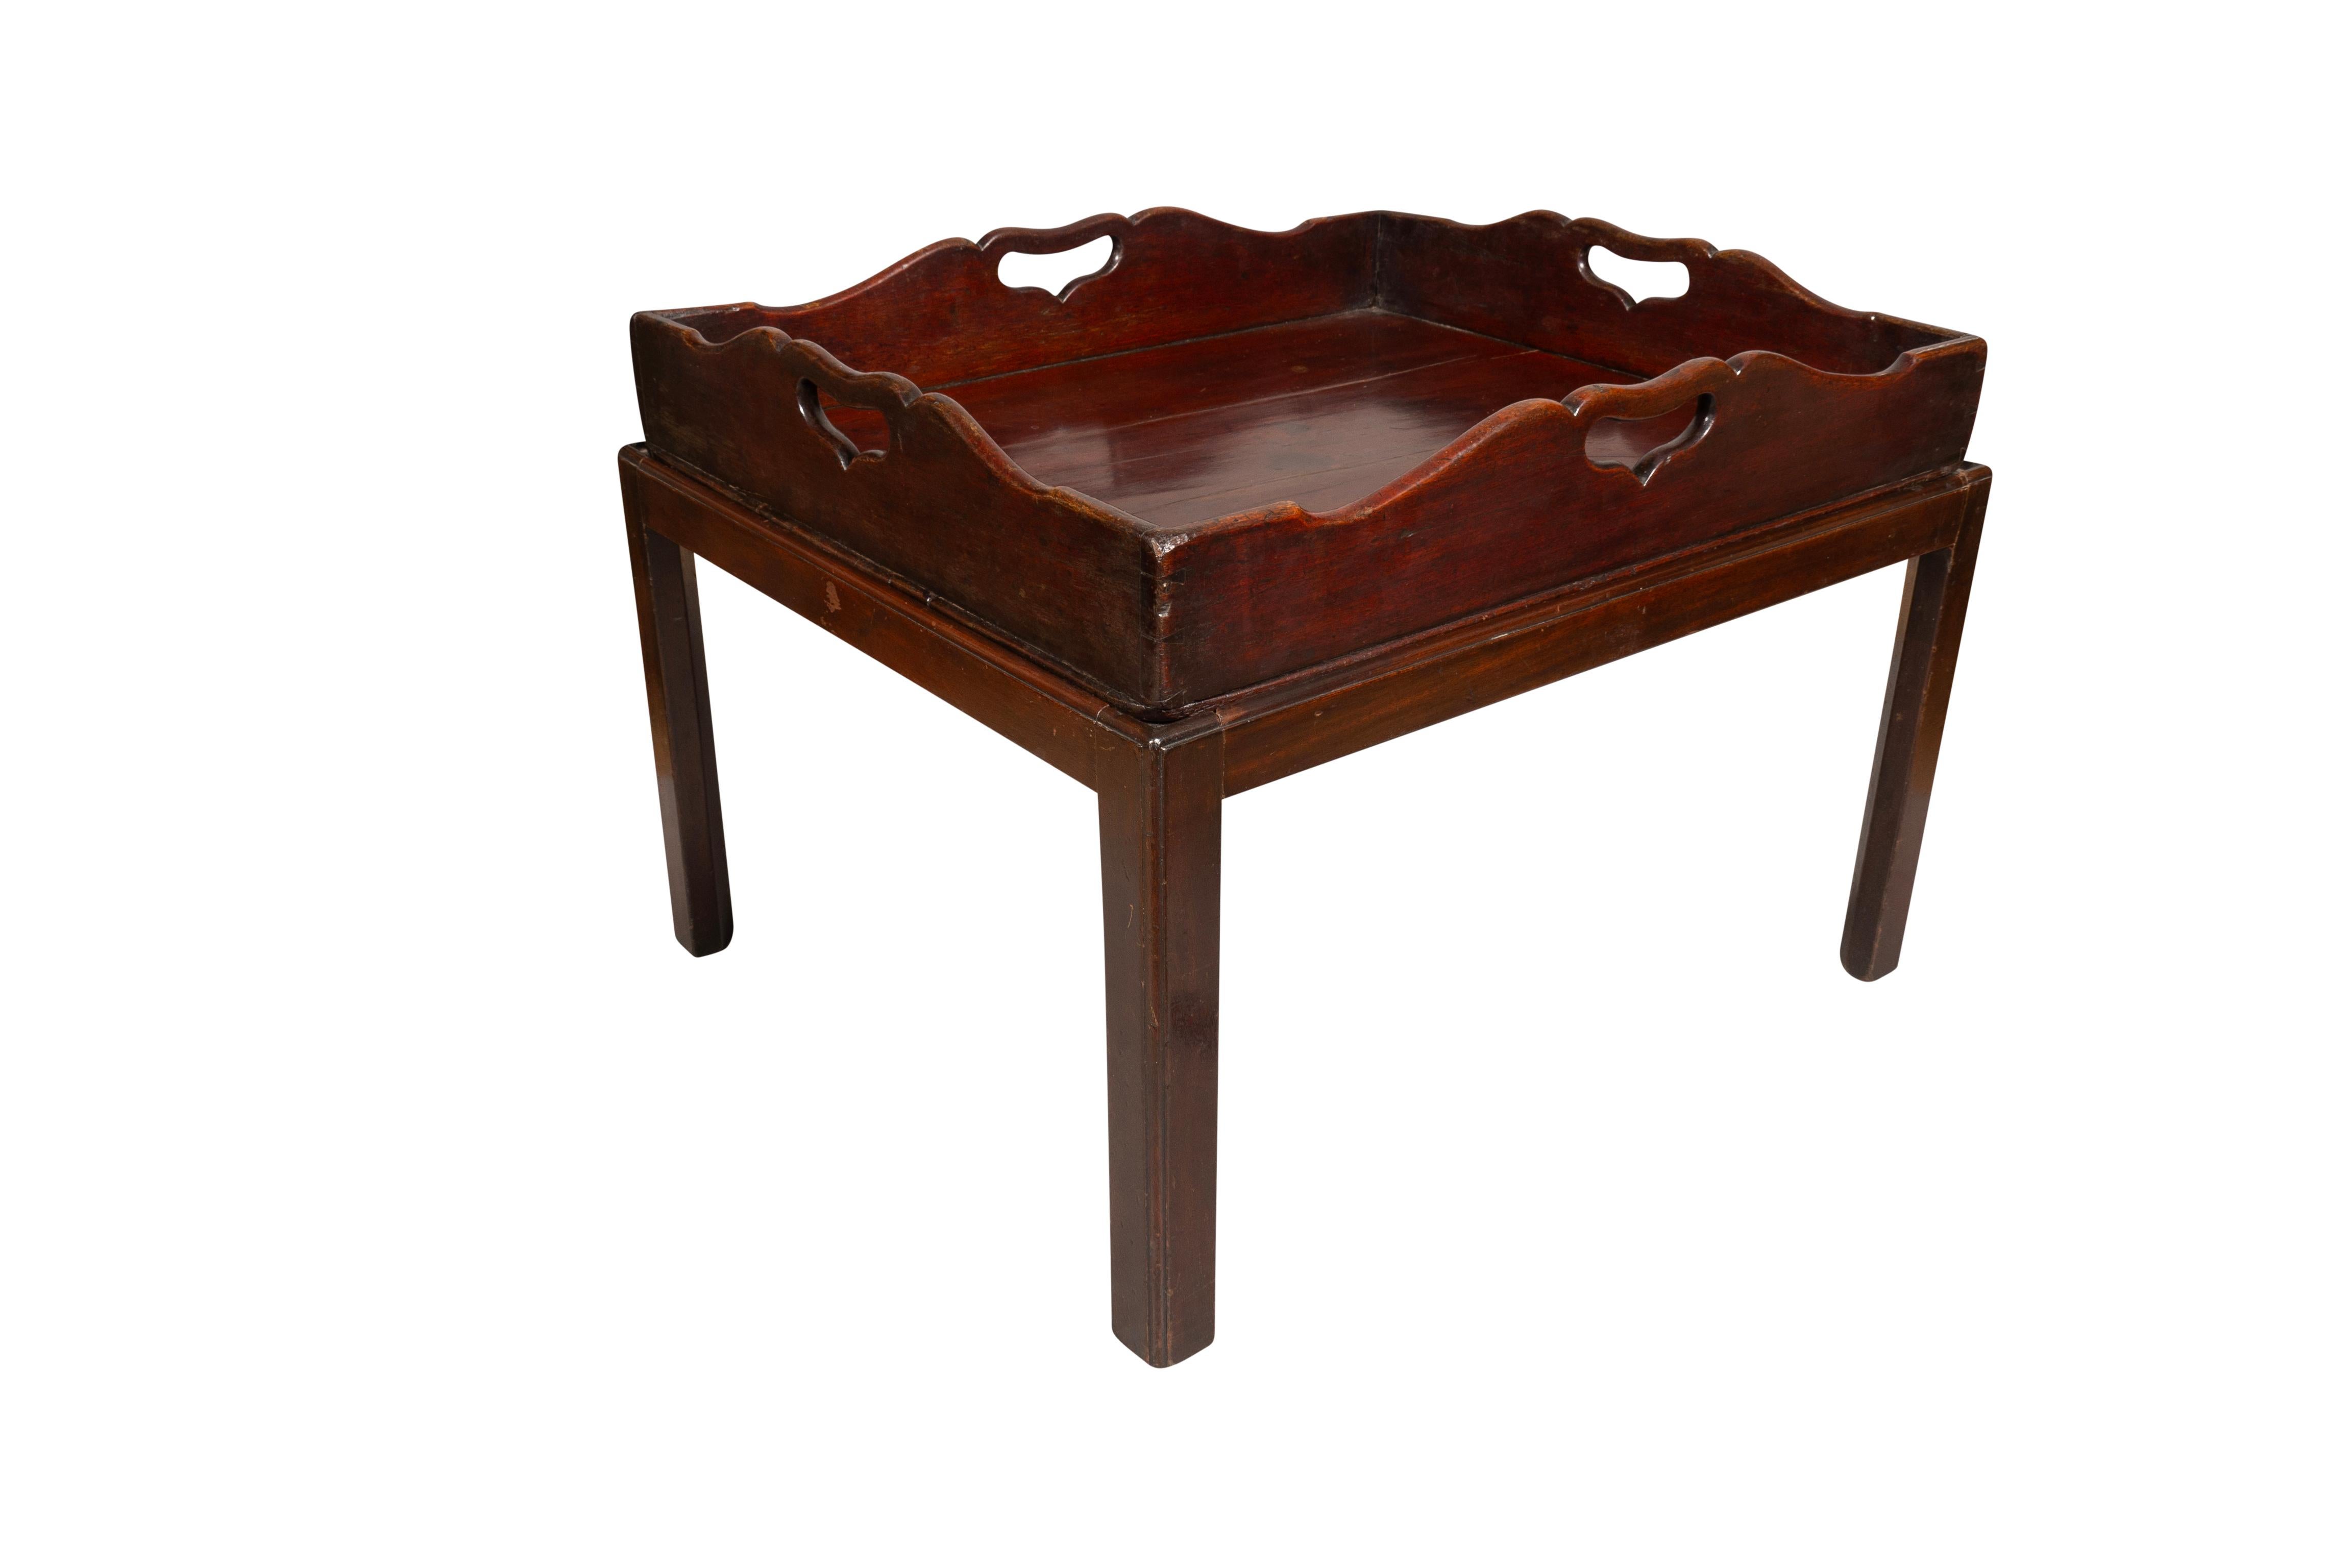 Rectangular tray with shaped gallery and cut out handholds, later mahogany base with square section legs.